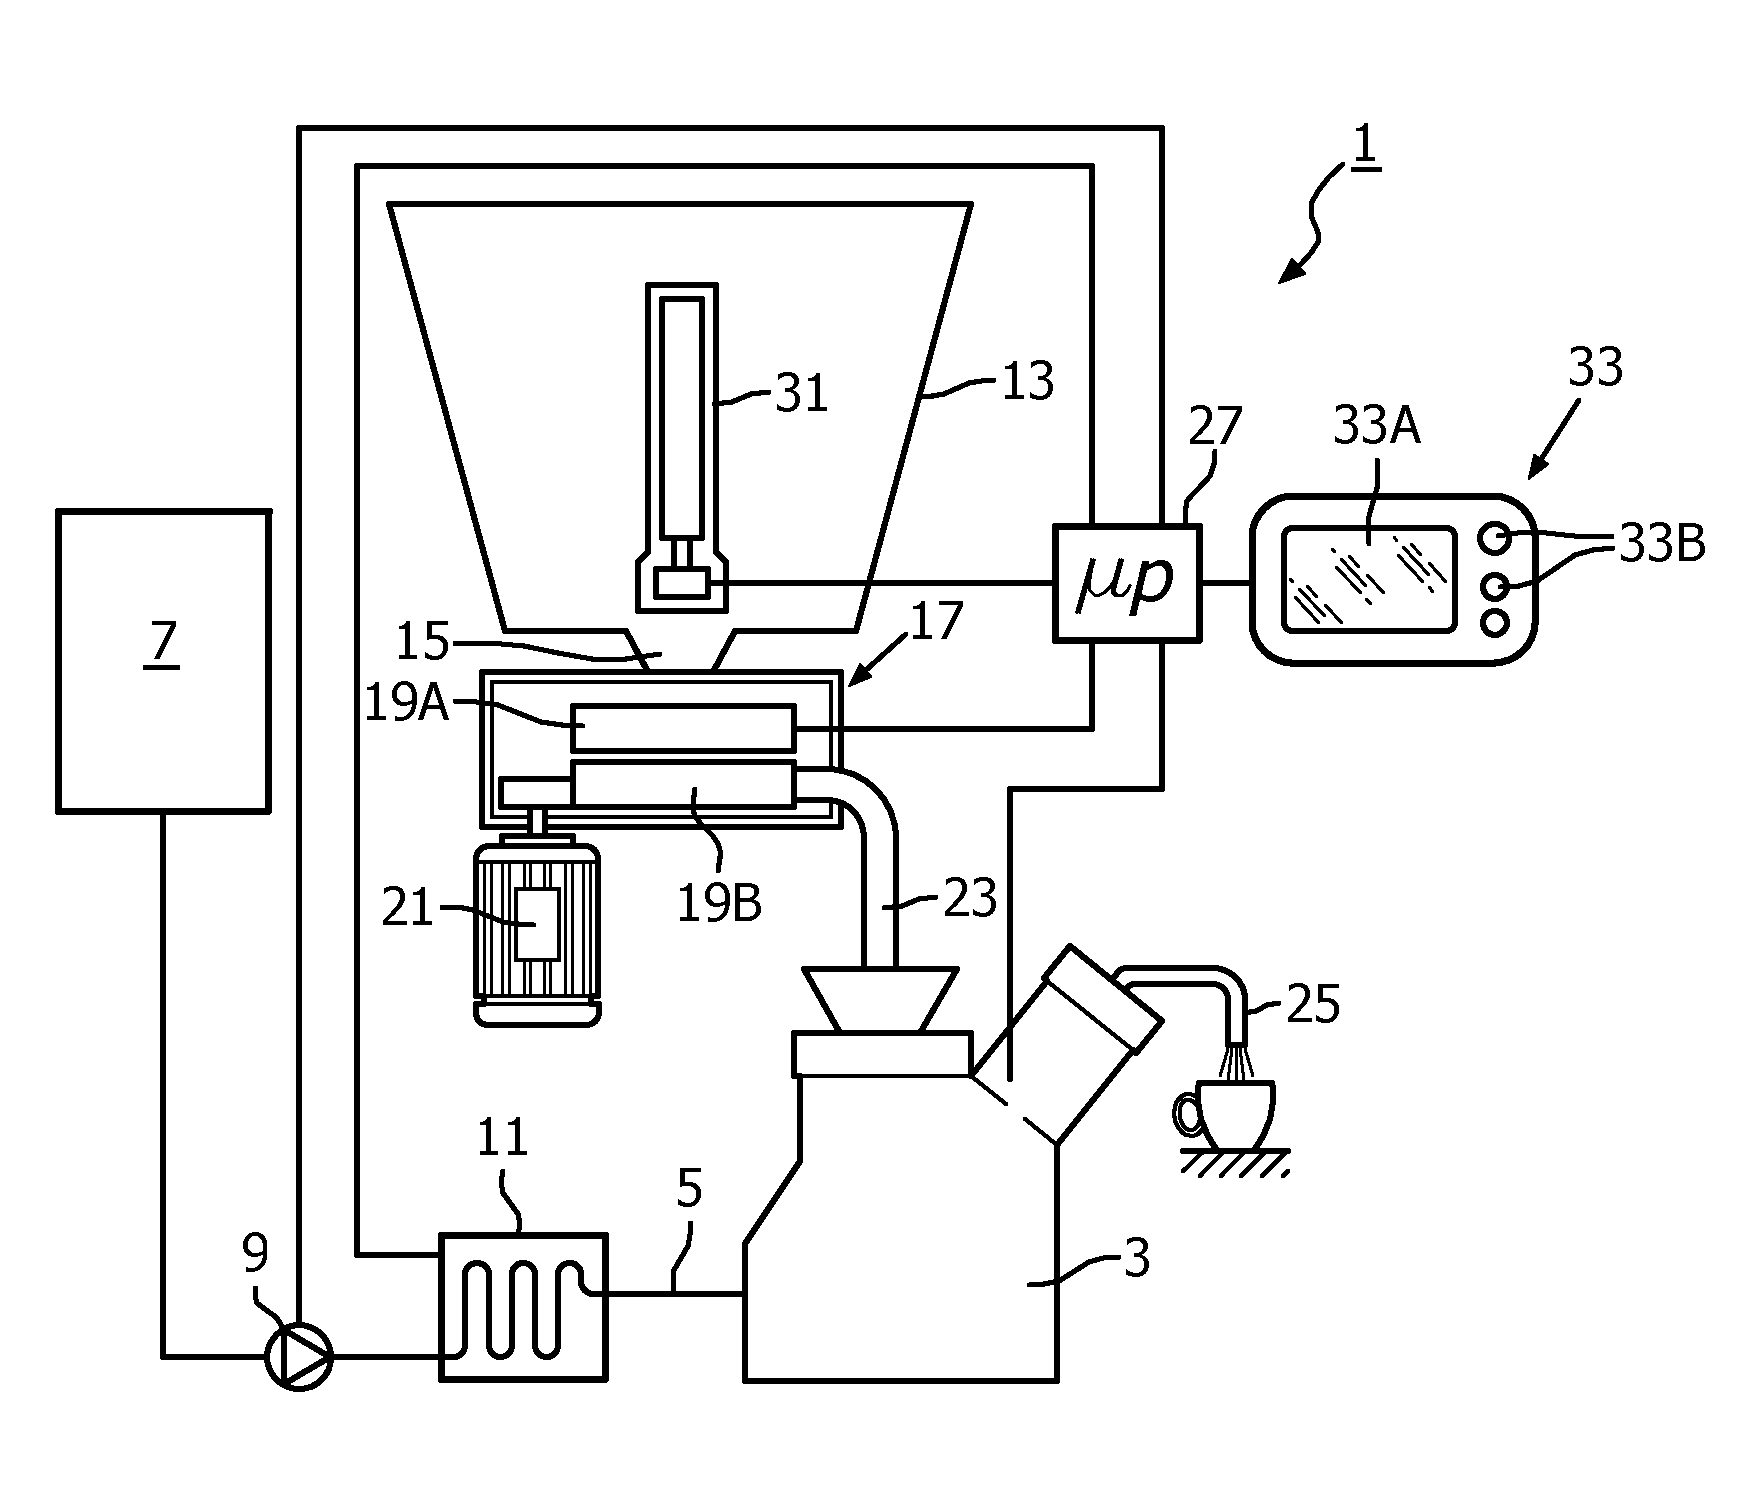 Automatic coffee maker with sensor for detecting the quantity of coffee in the machine